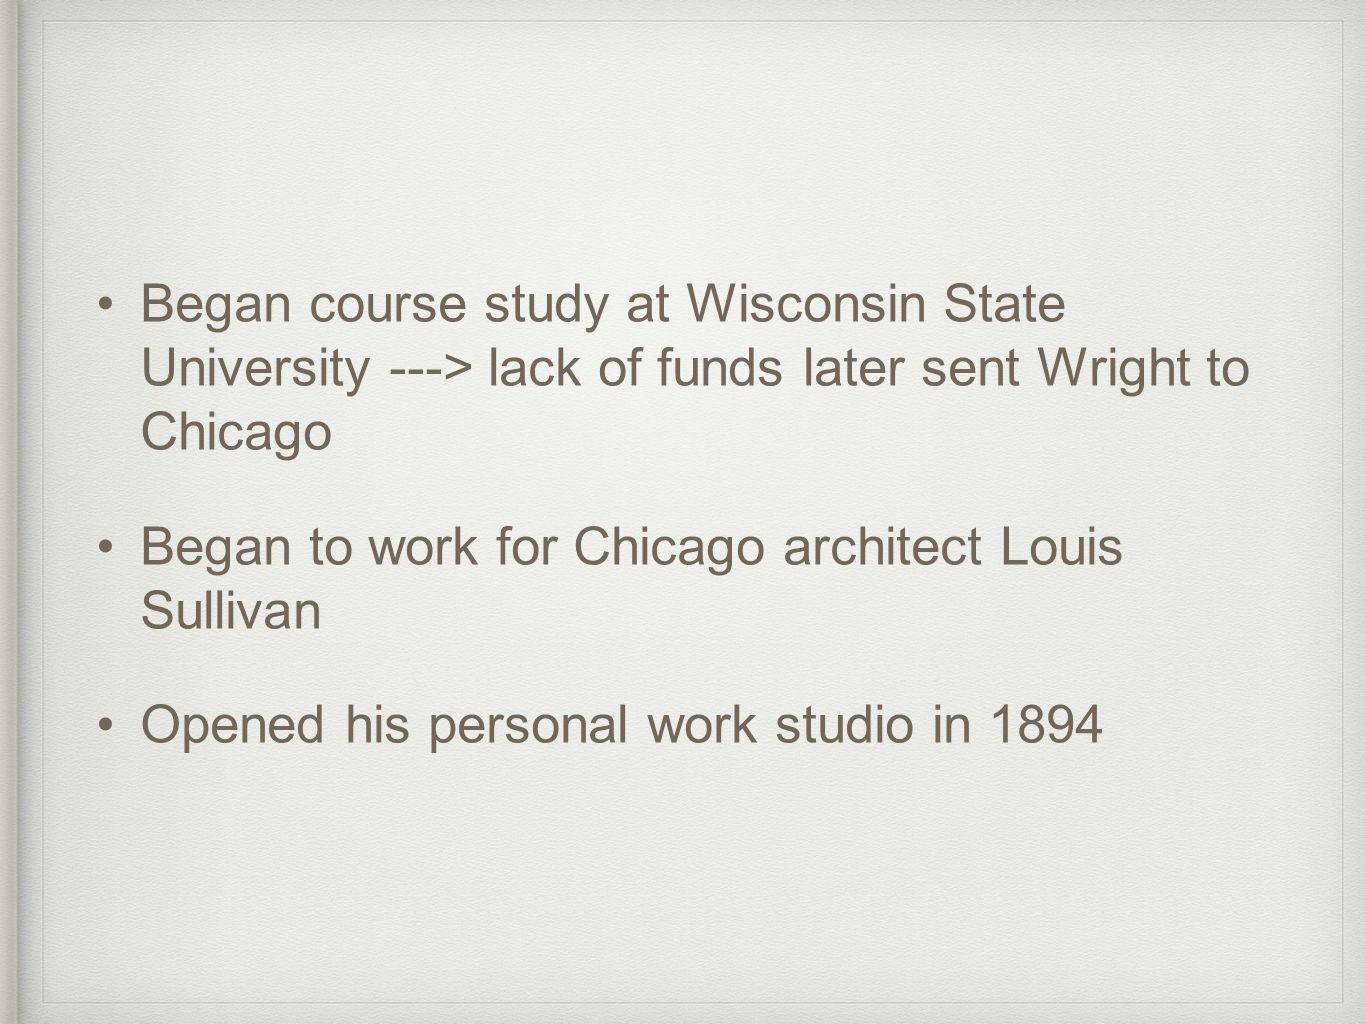 Began course study at Wisconsin State University ---> lack of funds later sent Wright to Chicago